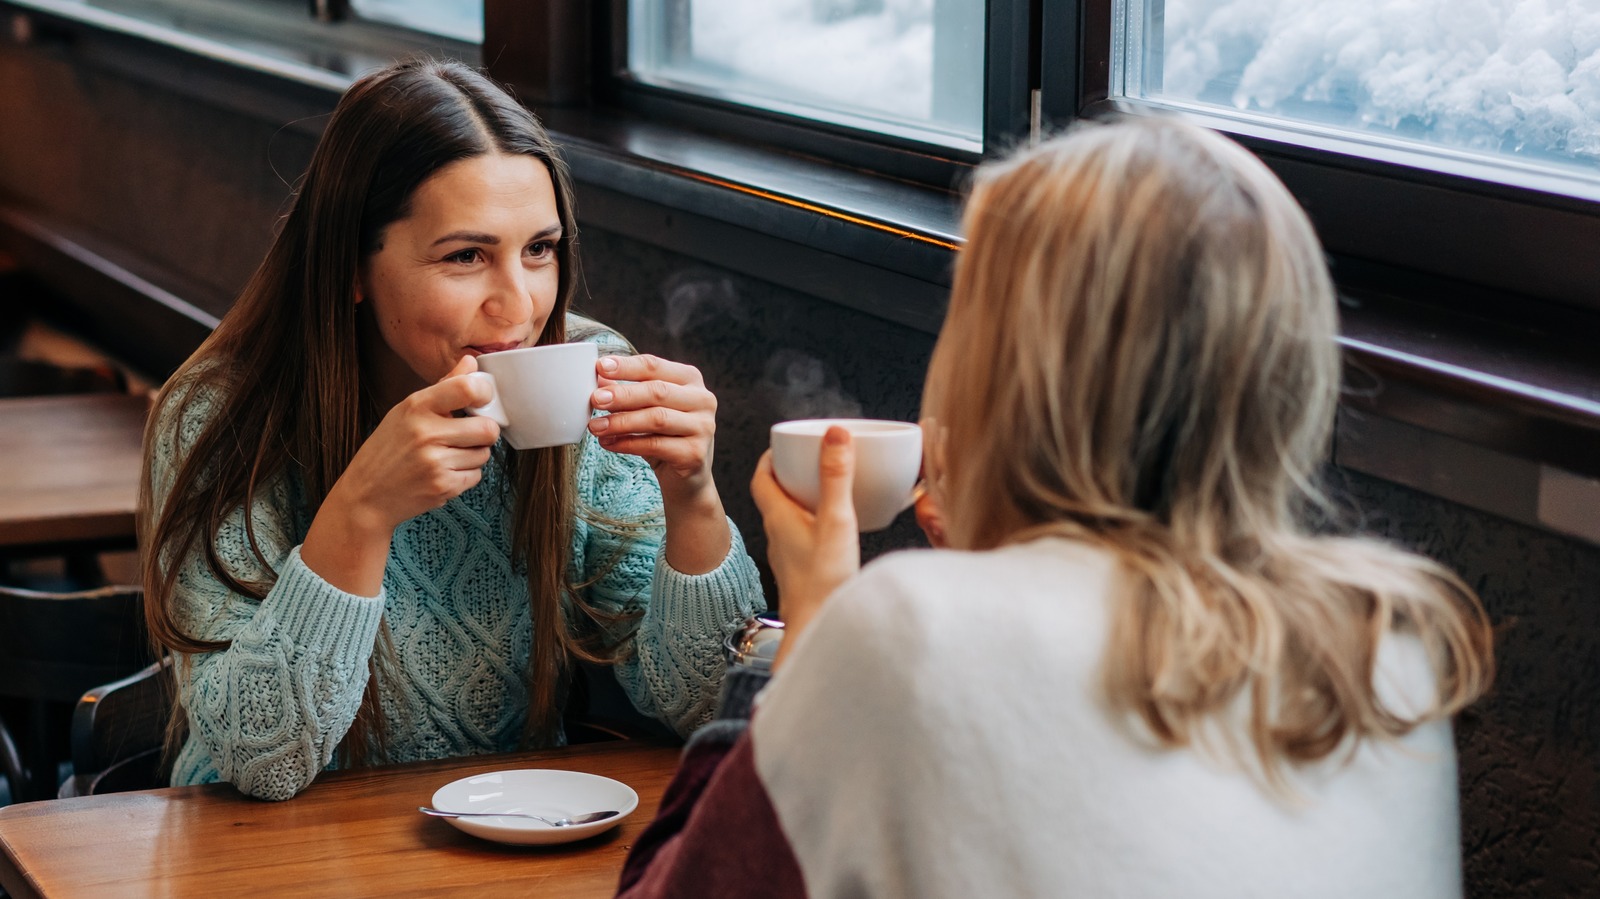 Our Best Tips For Mastering The Art Of Small Talk – Glam